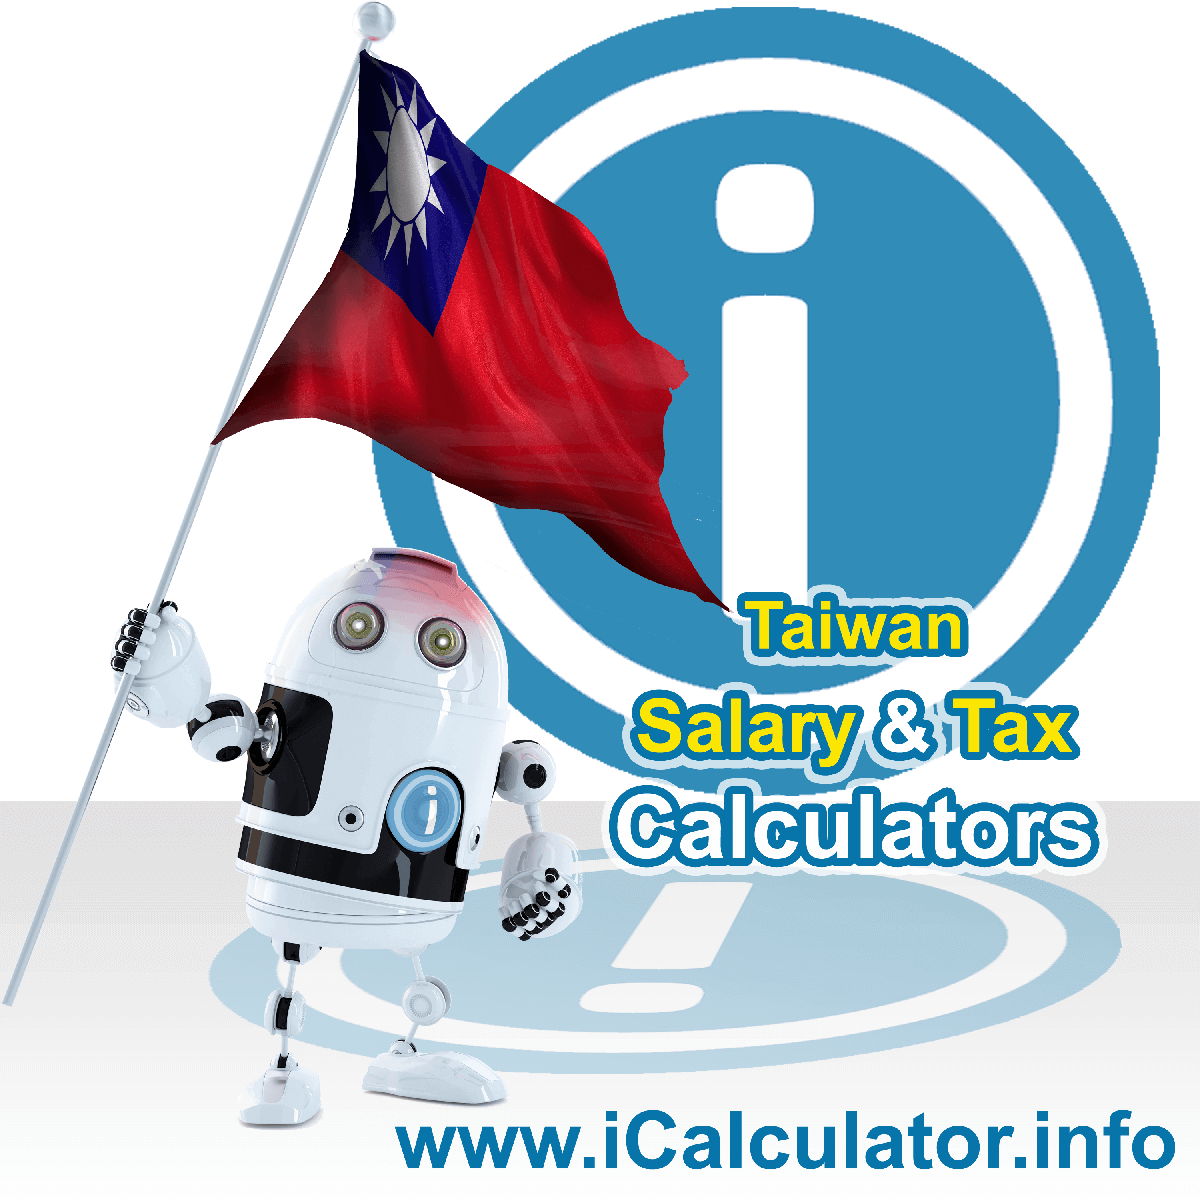 Taiwan Wage Calculator. This image shows the Taiwan flag and information relating to the tax formula for the Taiwan Tax Calculator